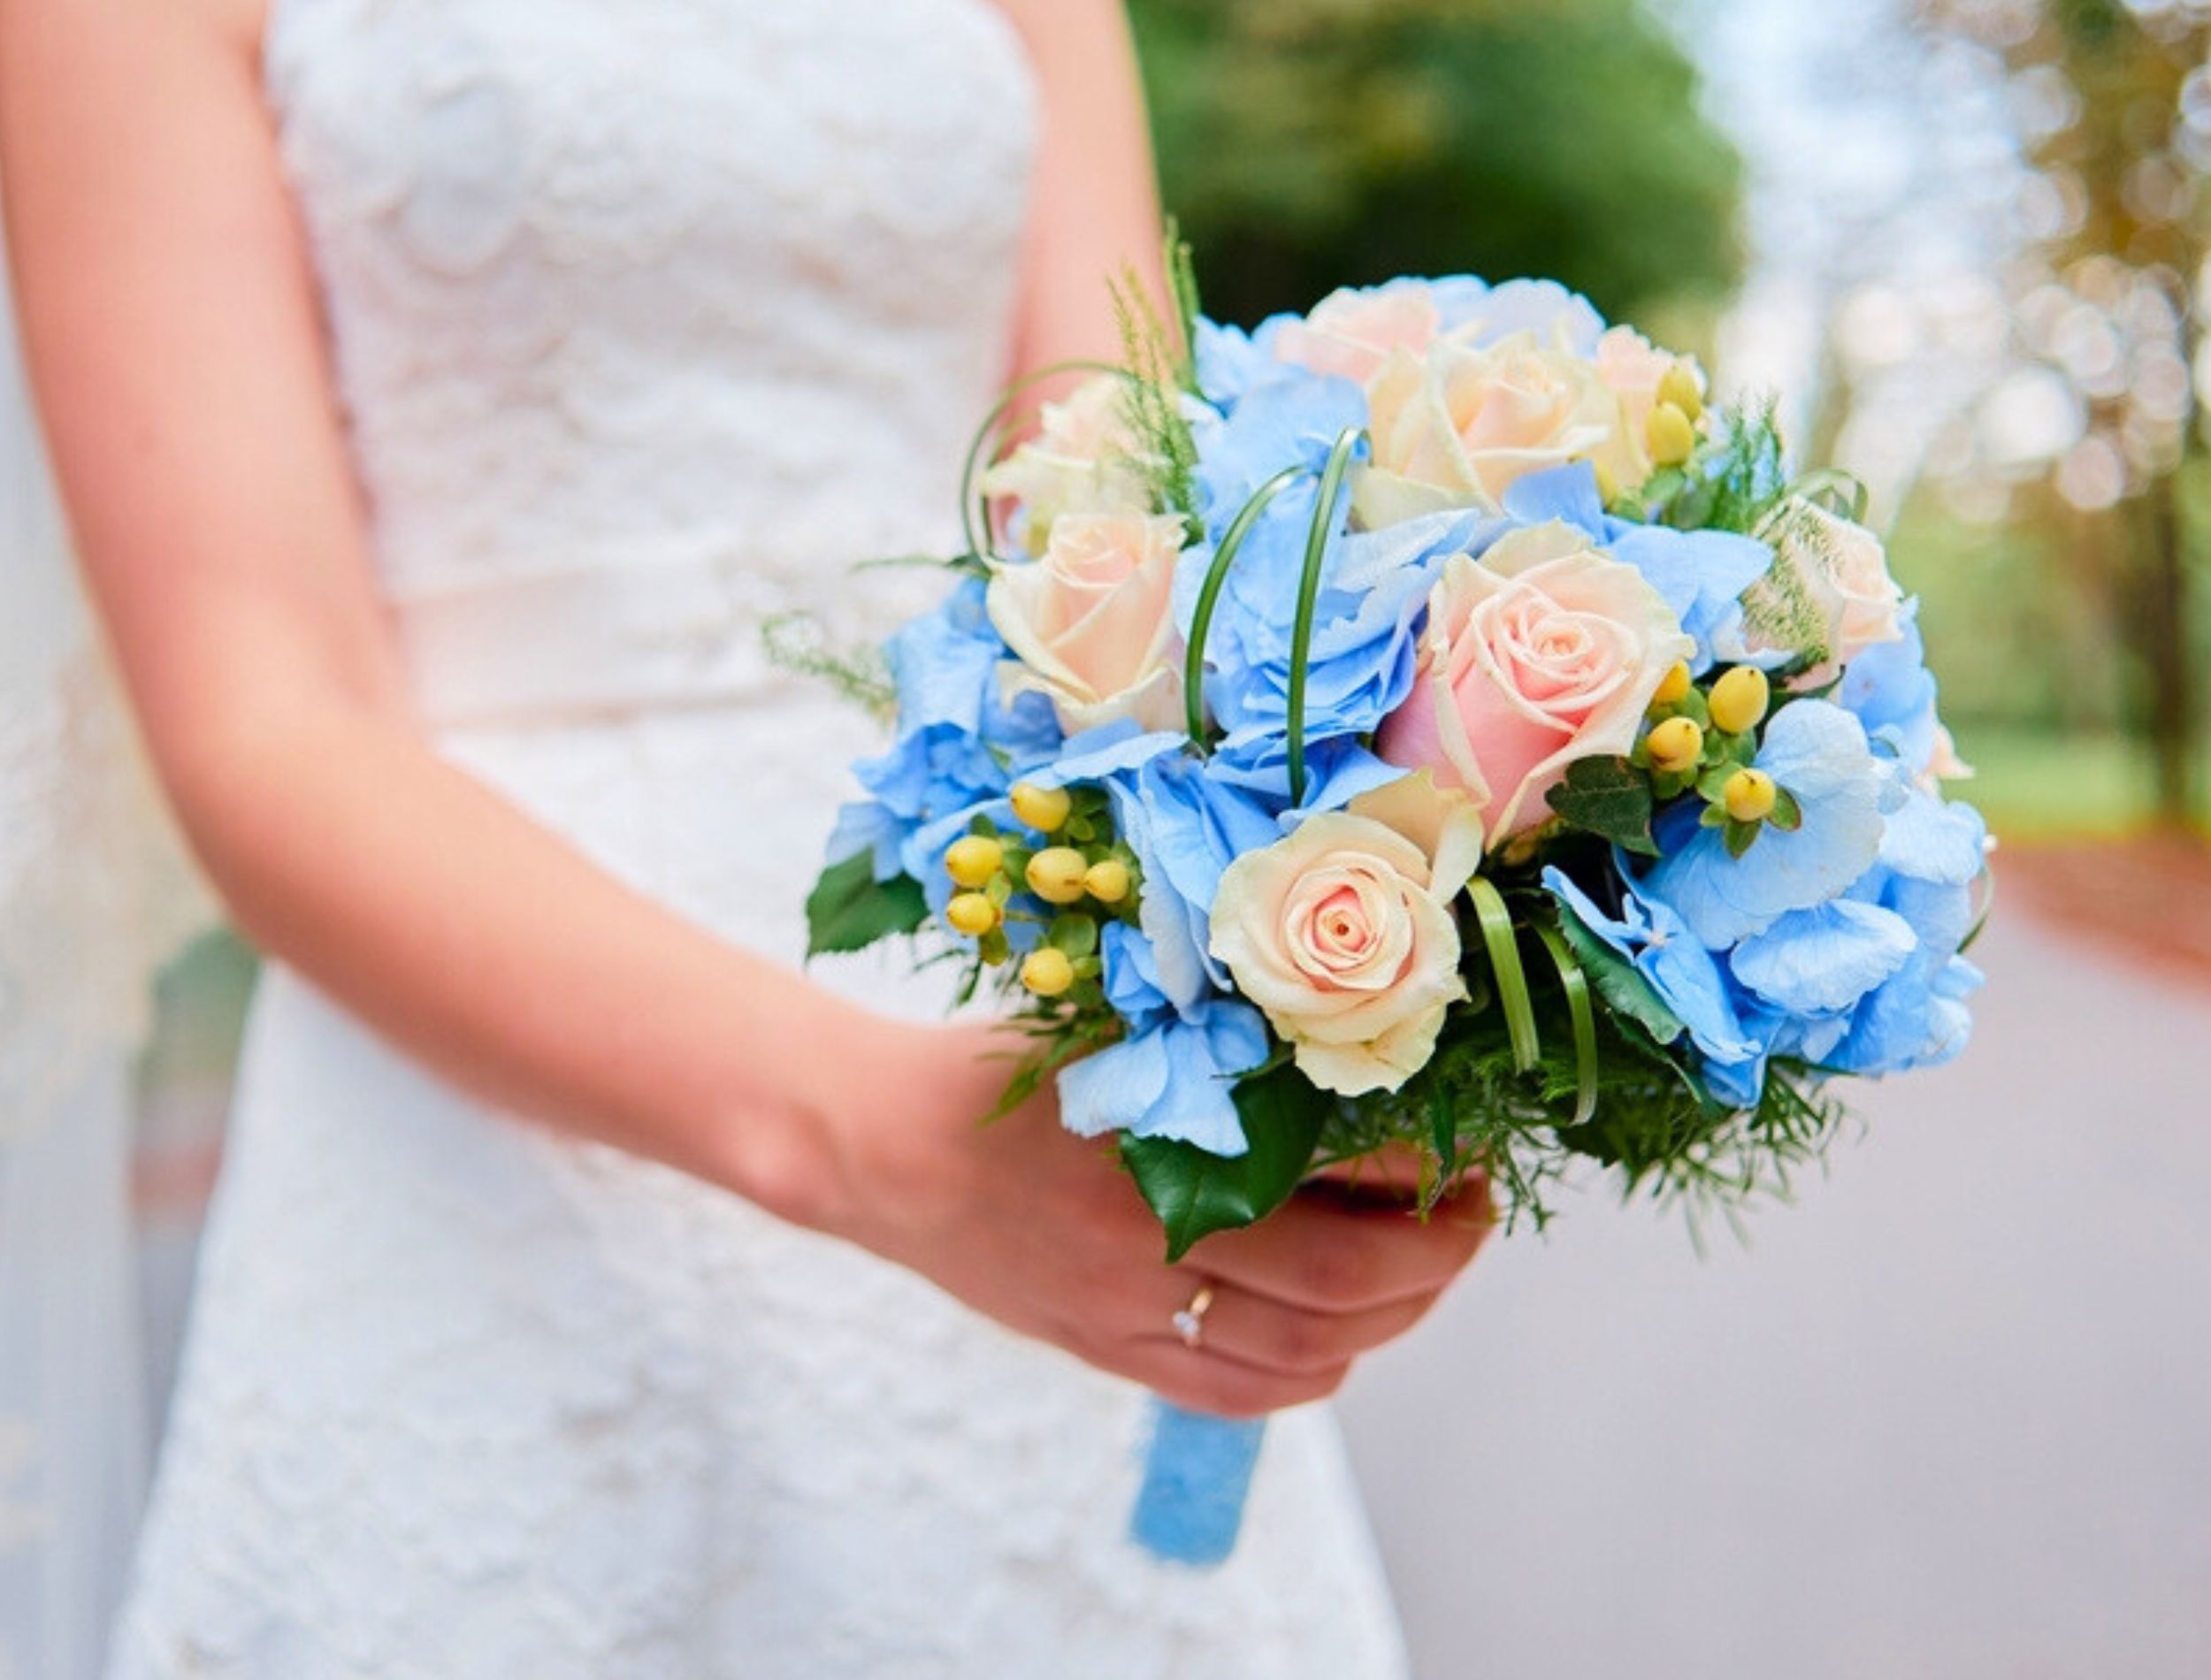 Bride holding bouquet of pink roses and blue-toned flowers